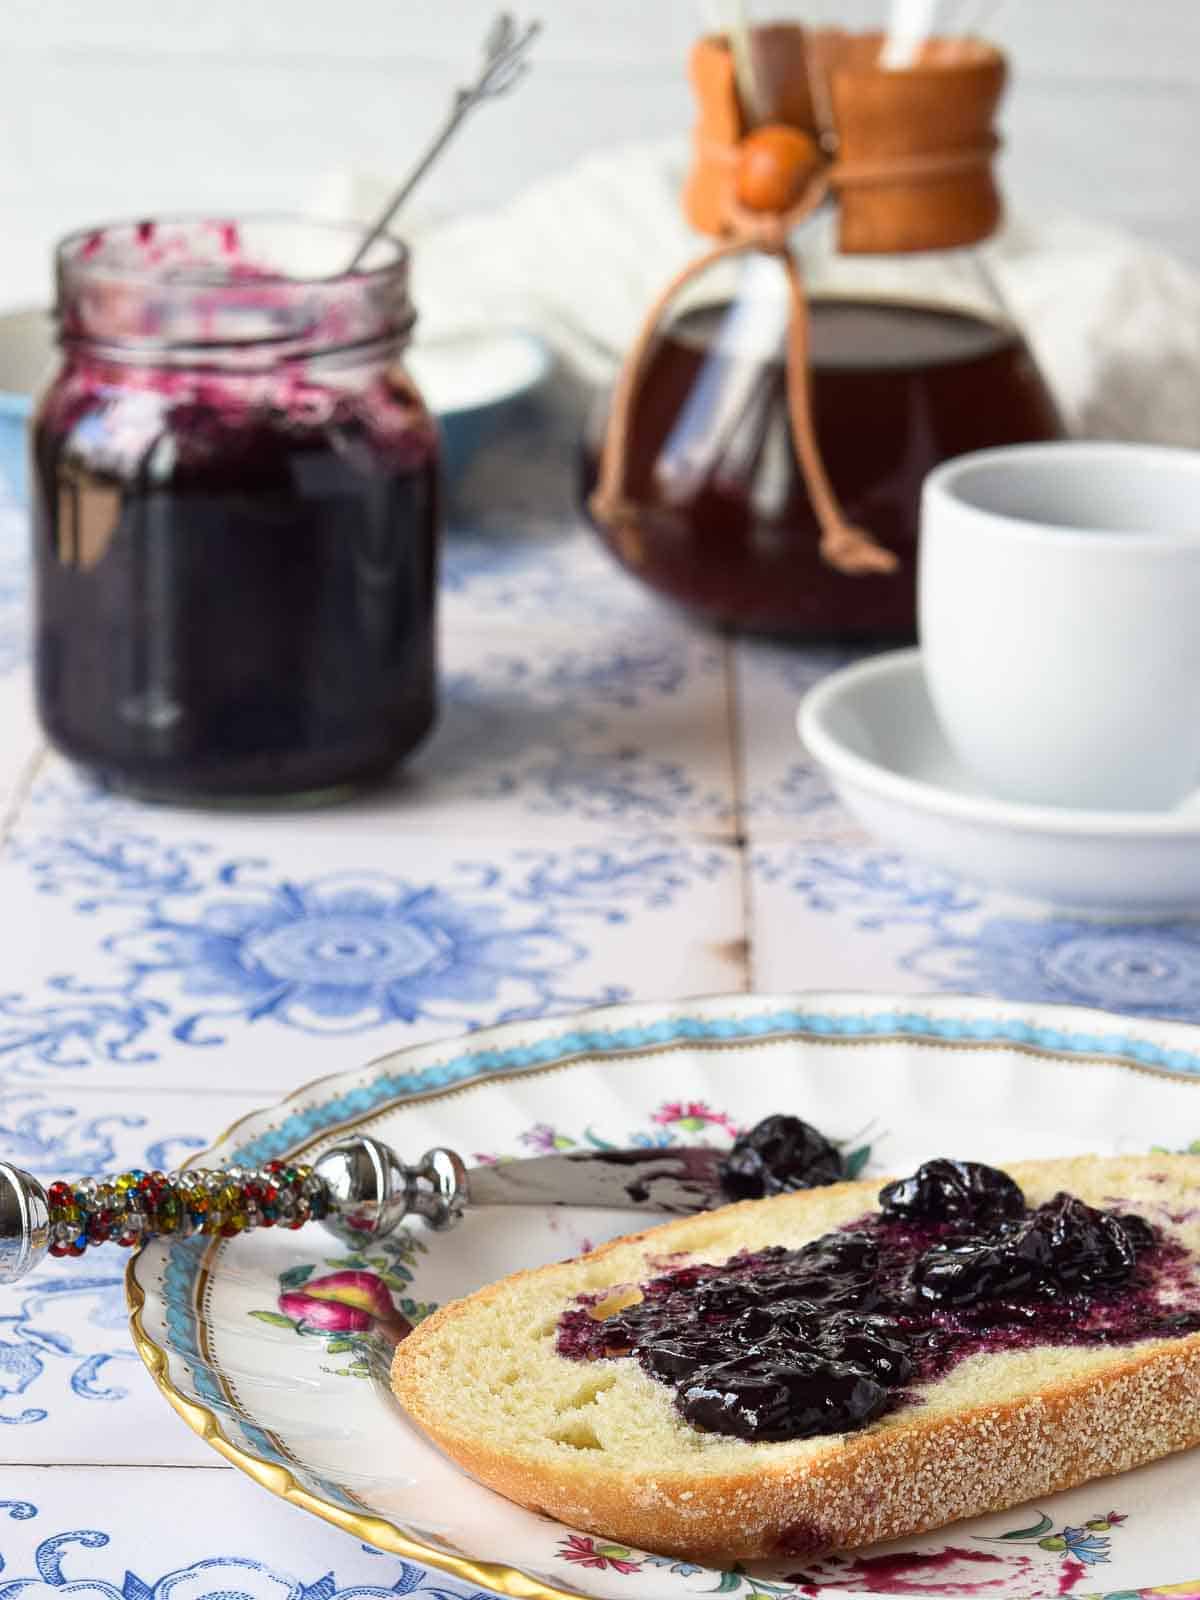 Blueberry earl grey jam spread on toast with coffee in the background.